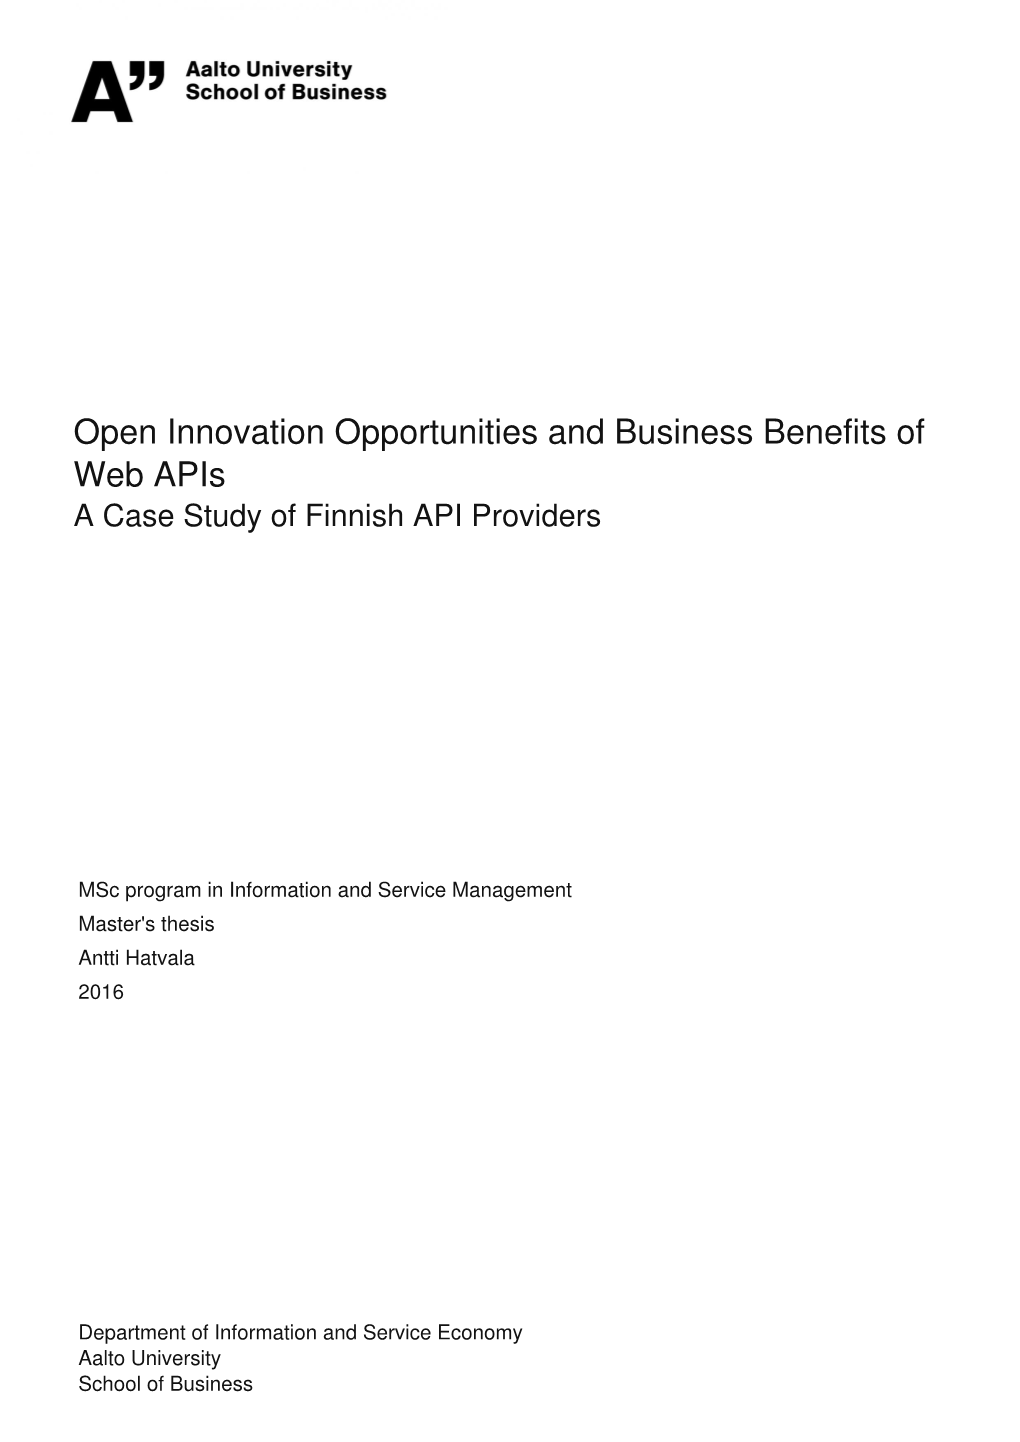 Open Innovation Opportunities and Business Benefits of Web Apis a Case Study of Finnish API Providers